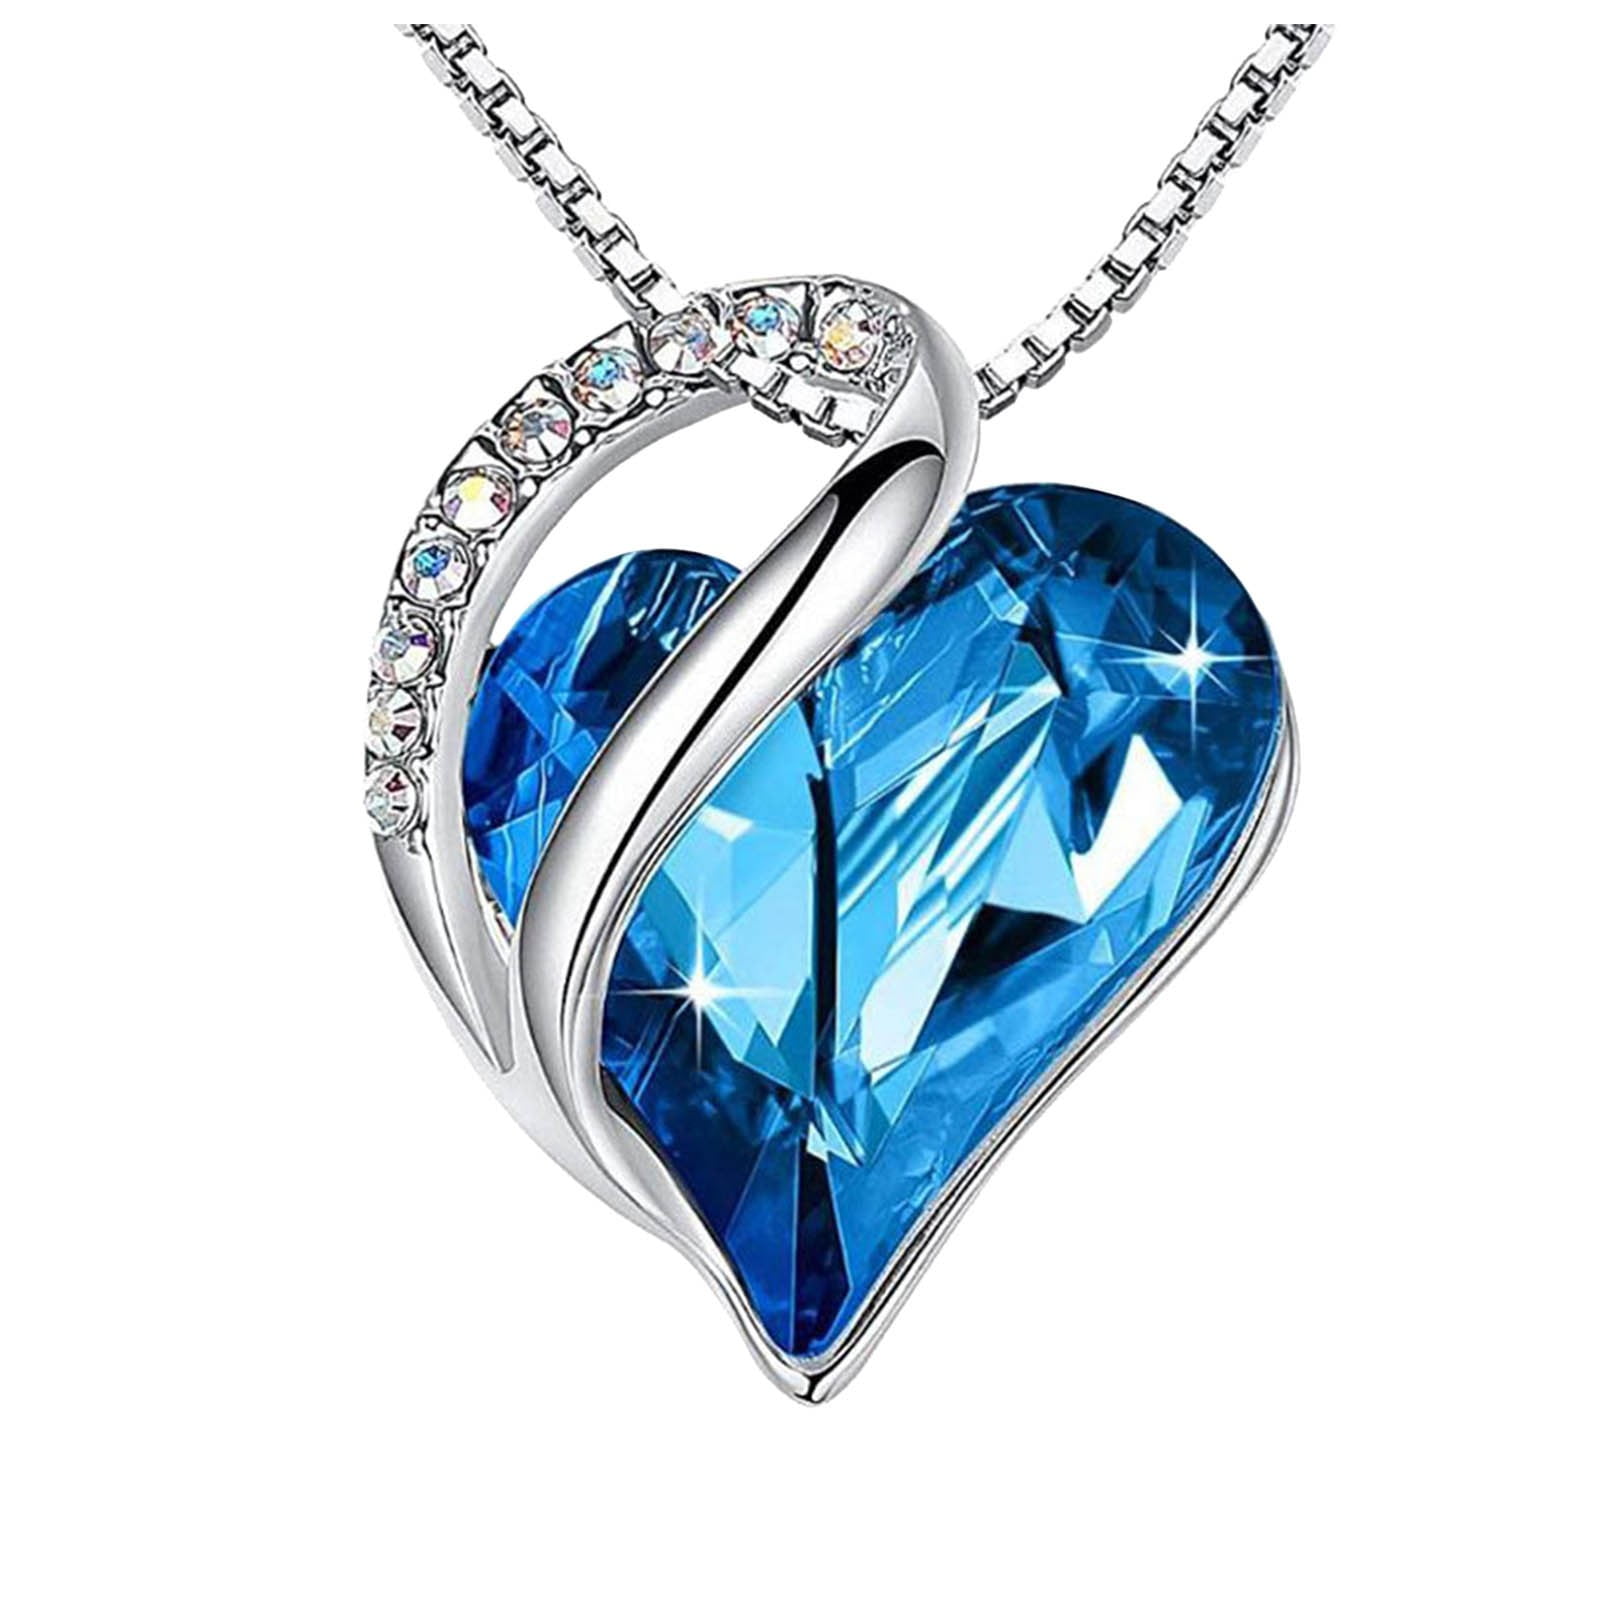 Ladies Heart Crystal Pendant Silver Chain Necklace Womens Ladies Jewellery Gift 